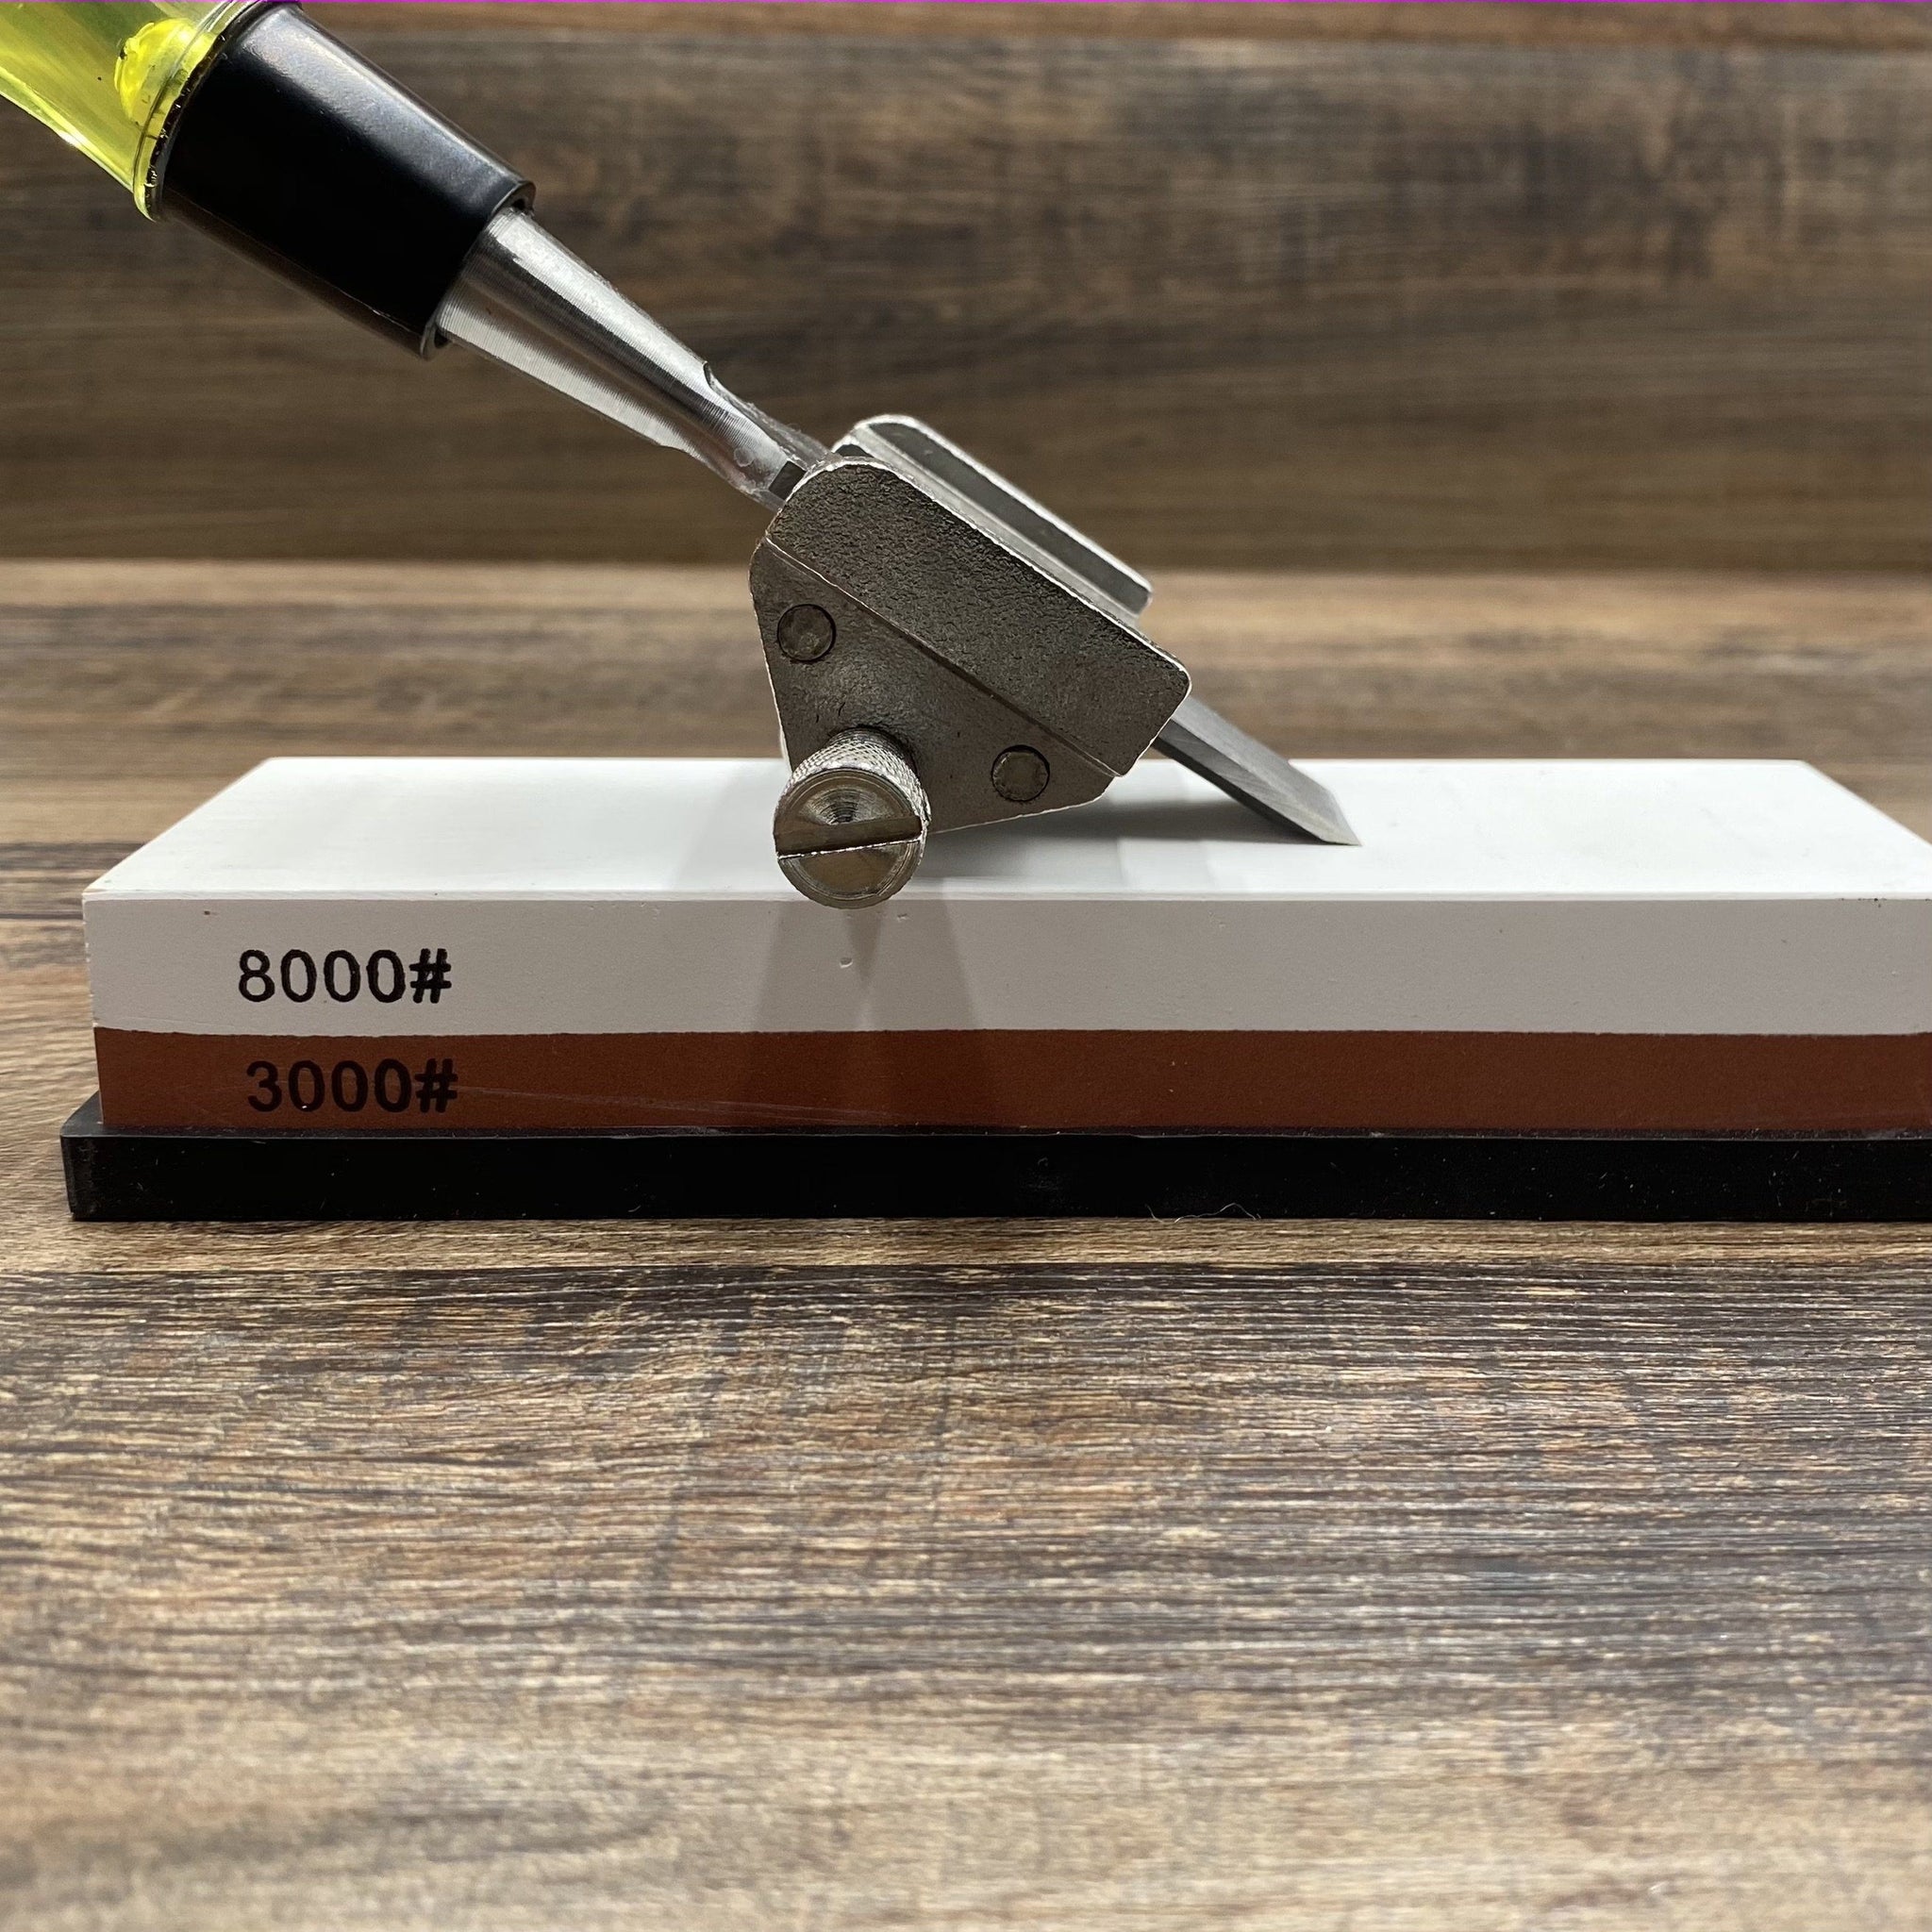 Chisel Sharpening Jig: Perfectly Sharpen Wood Chisels – Ruixin Pro Sharp